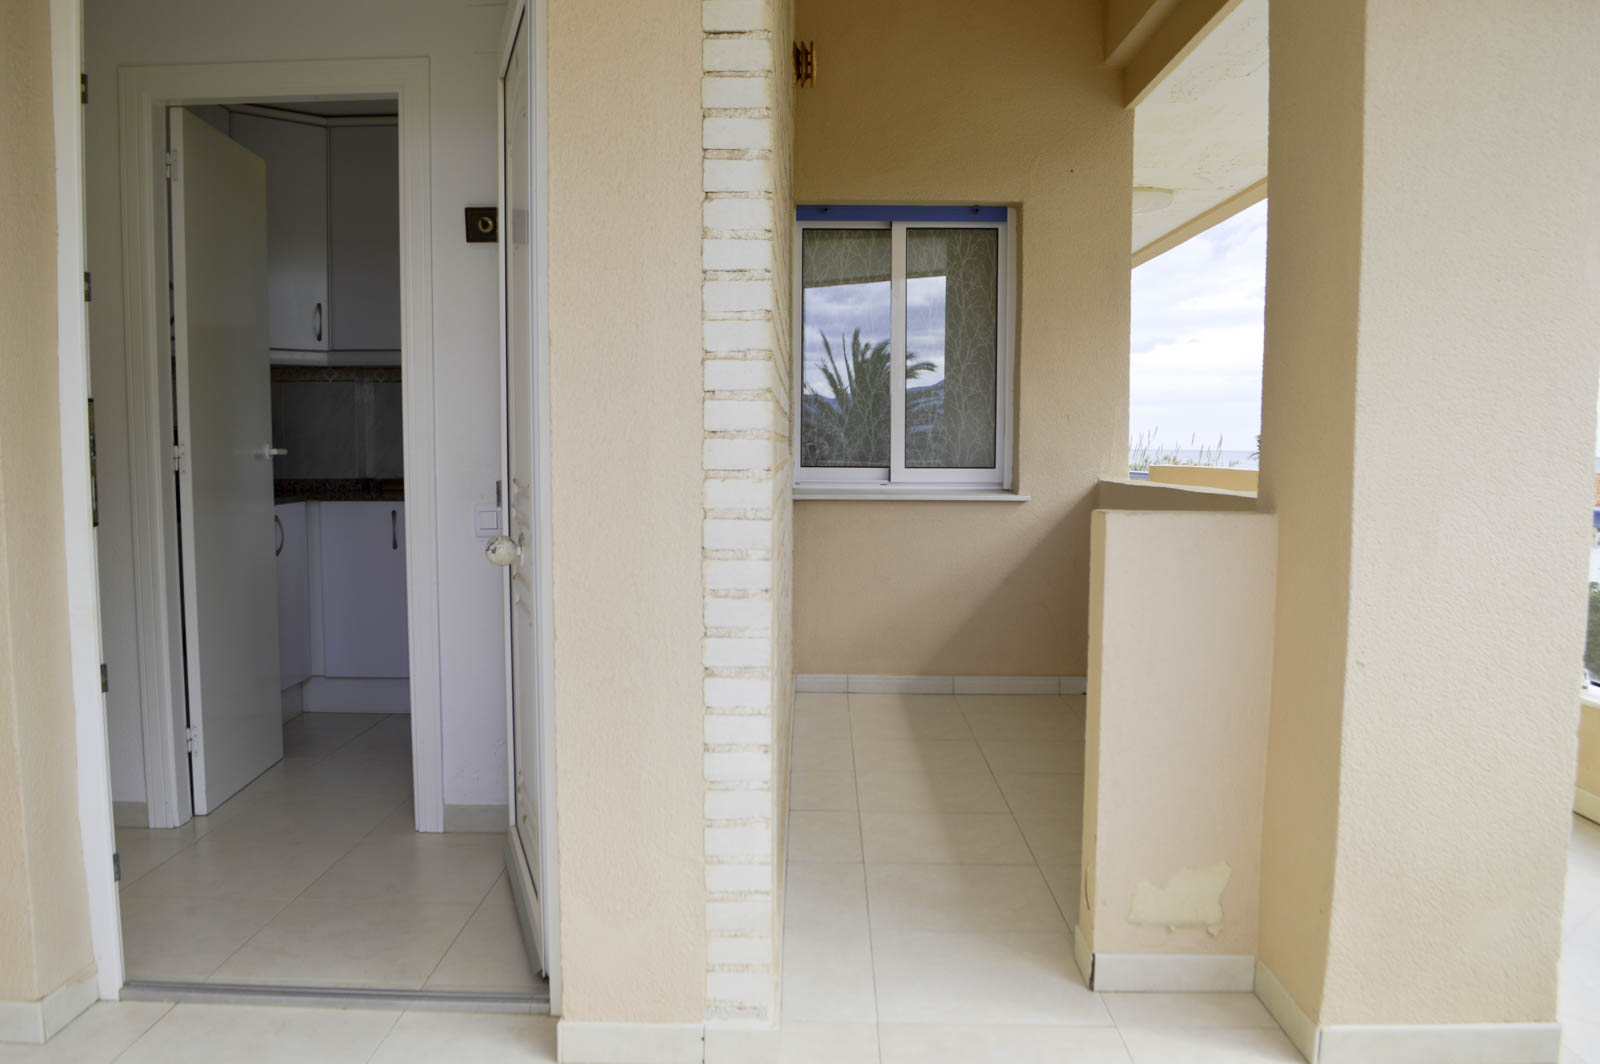 2-bedroom apartment with sea views and direct access to sandy beach